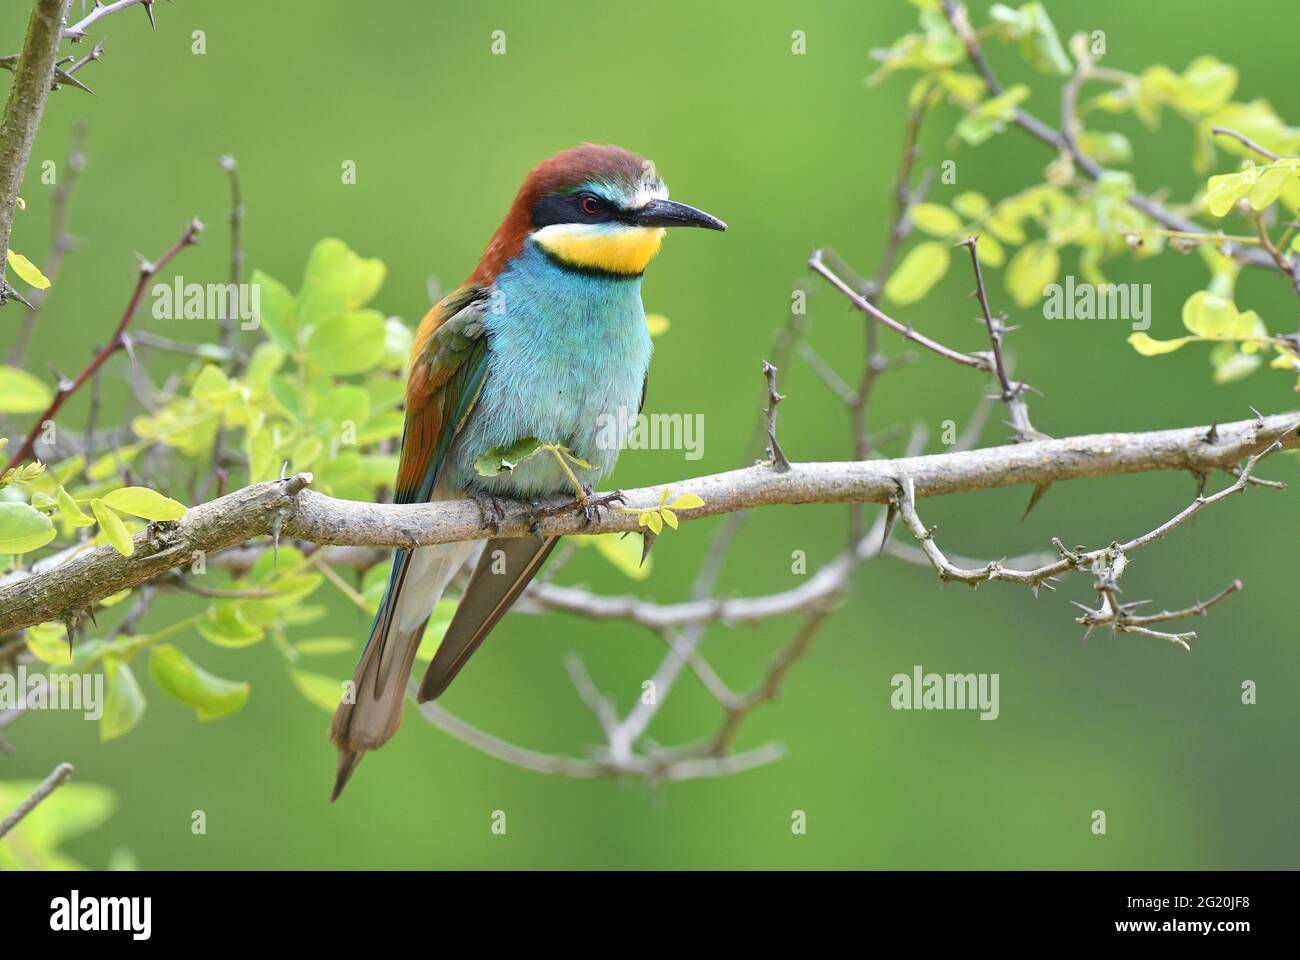 European Bee eater (Merops apiaster) perching on a twig Stock Photo